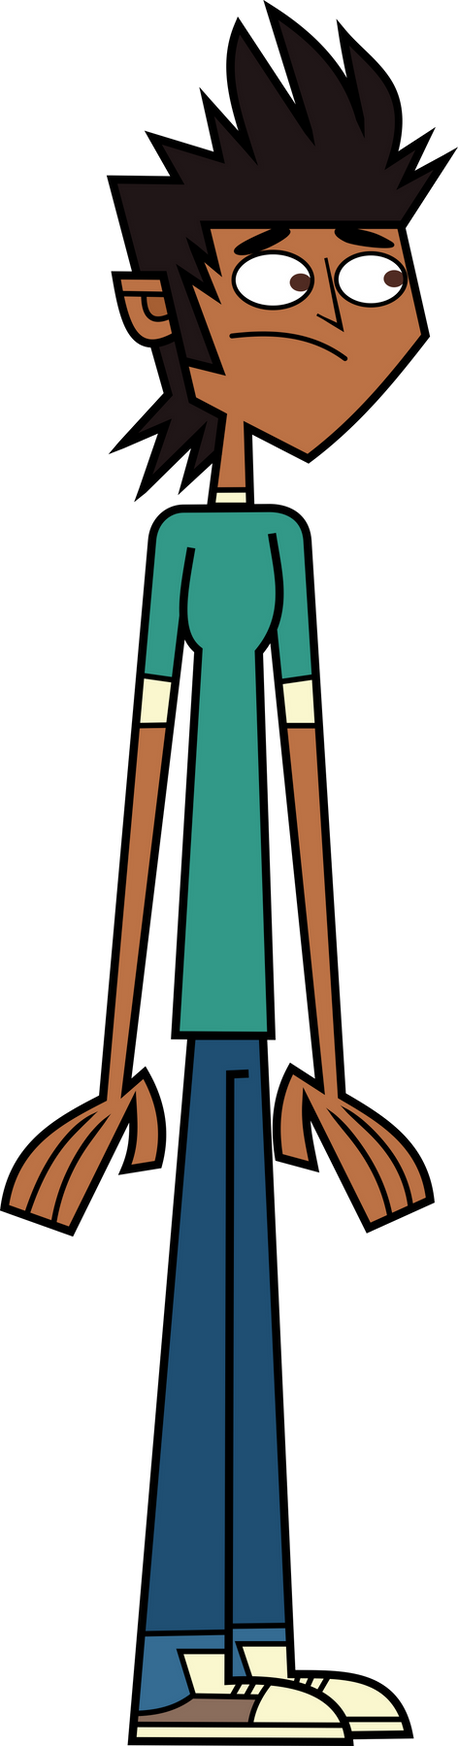 Mike Total Drama All Stars by Lilothestitch on DeviantArt.